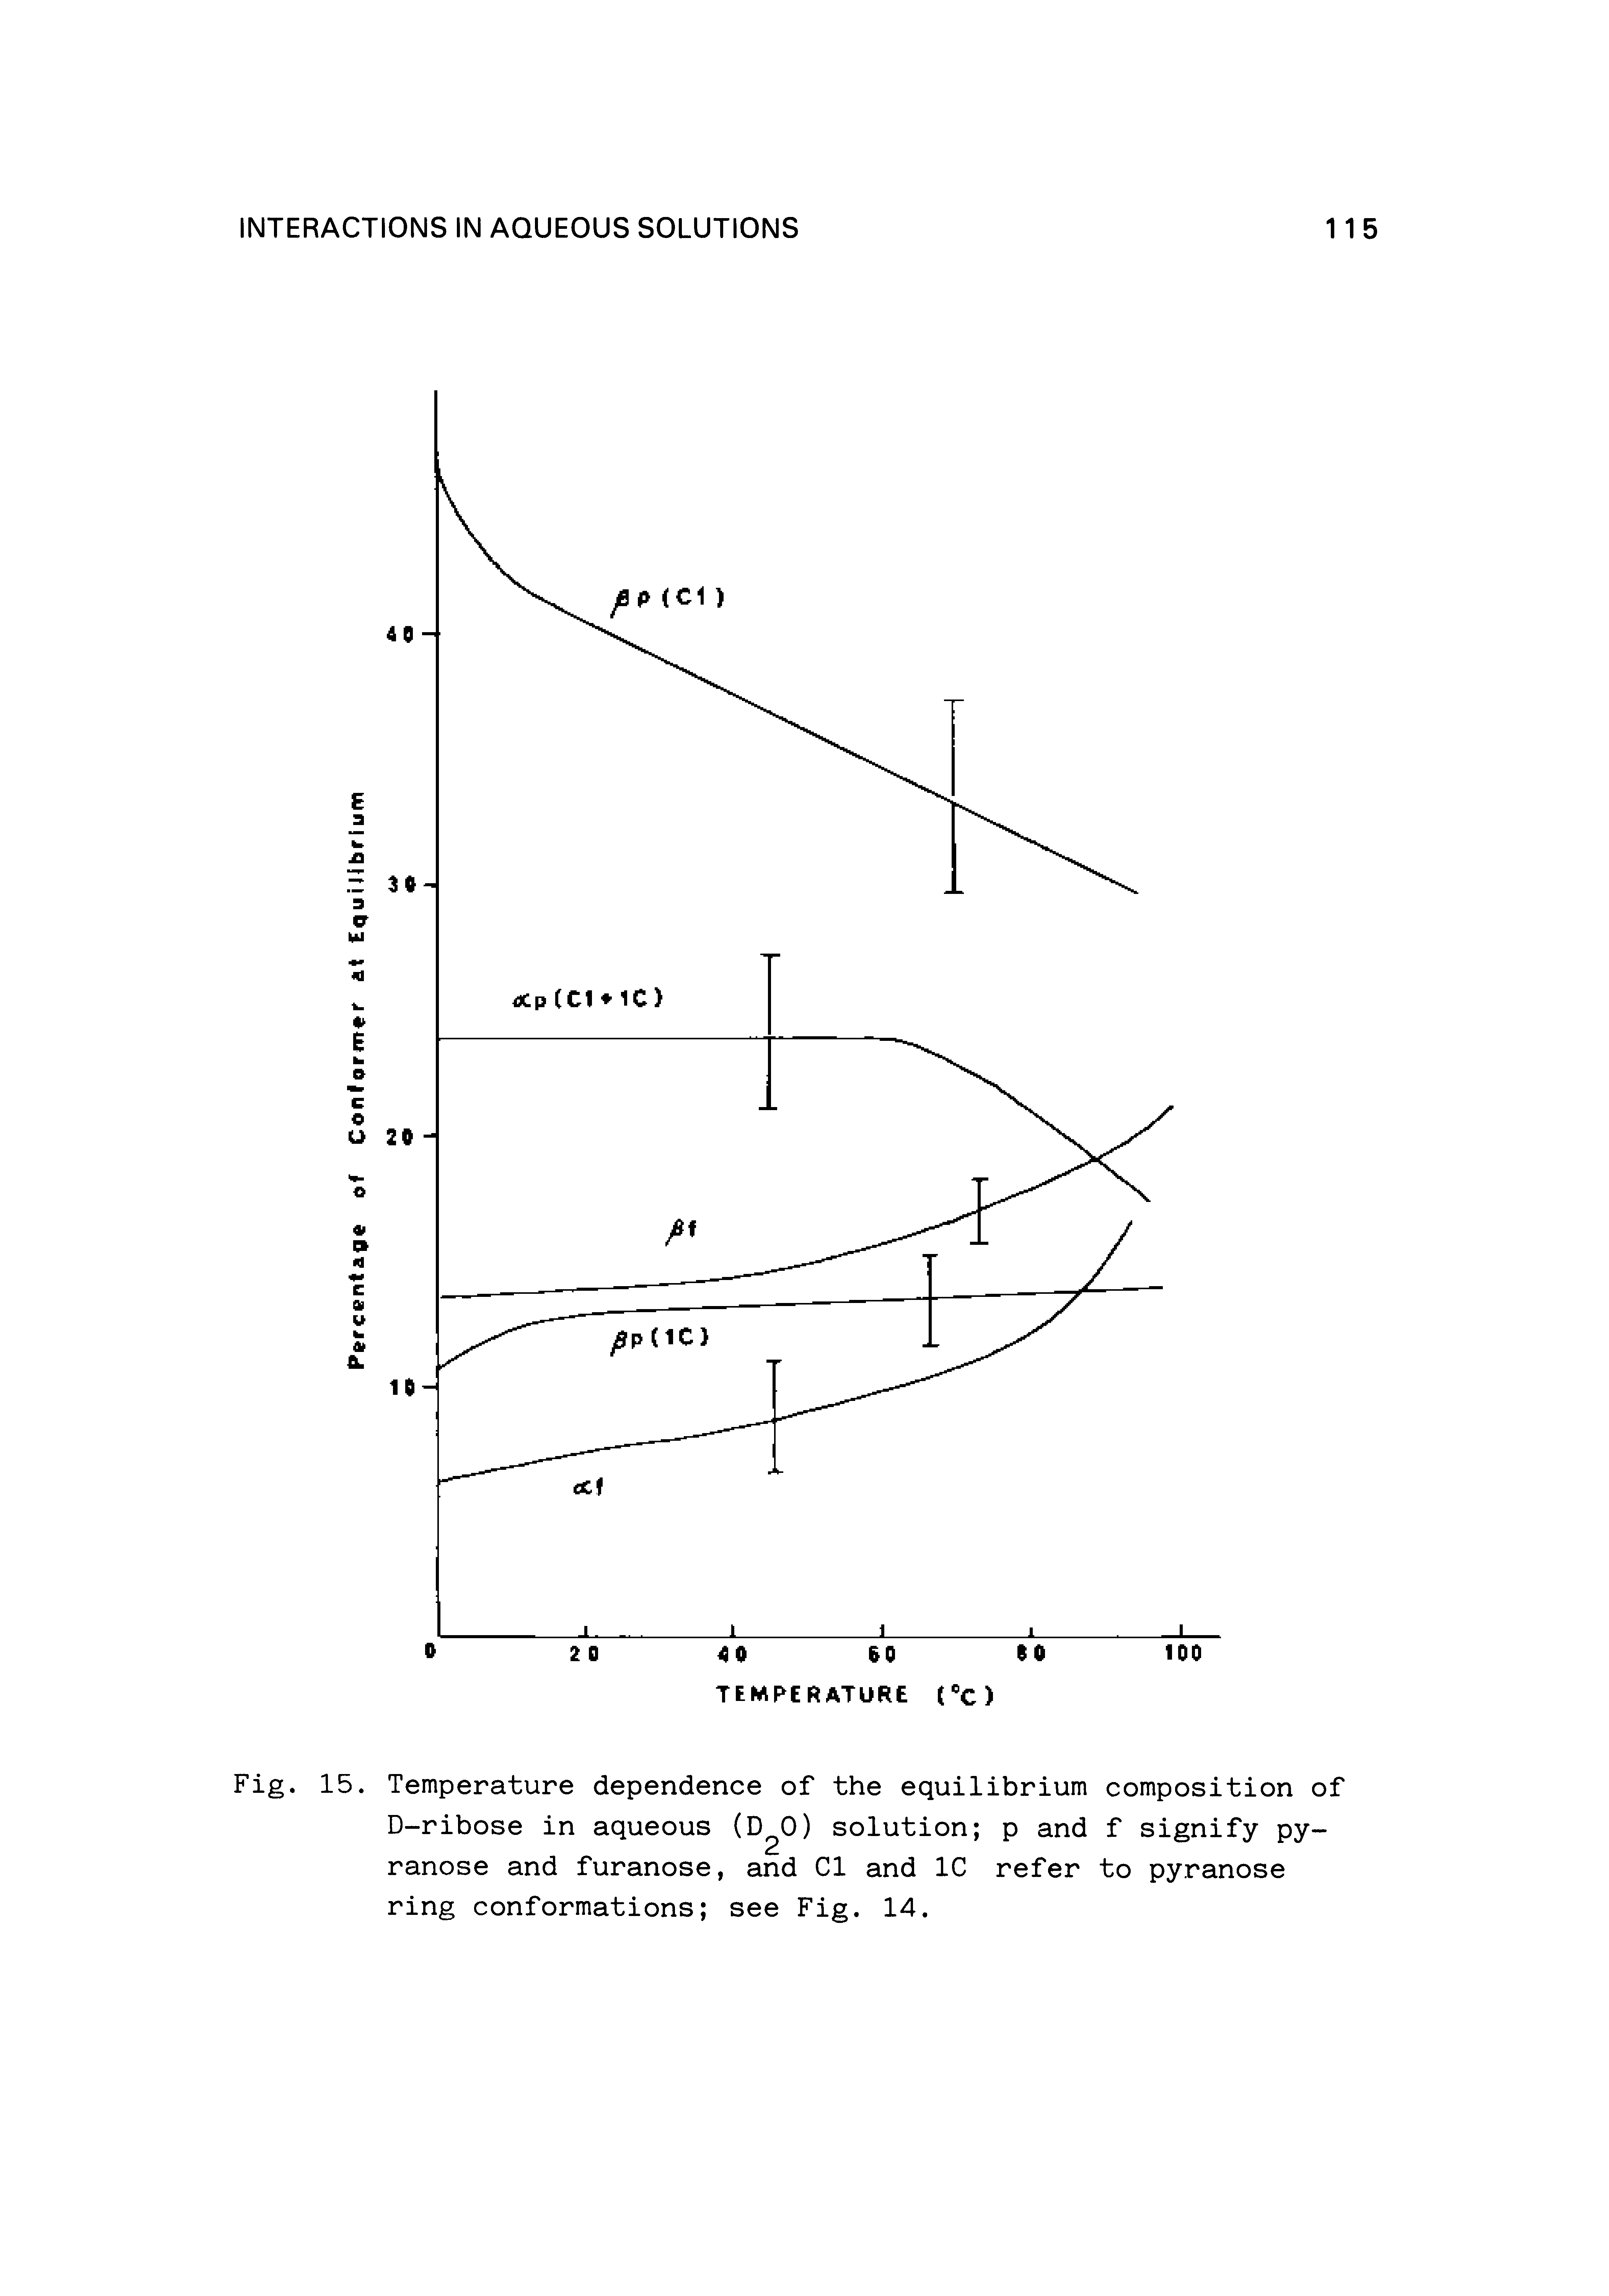 Fig. 15. Temperature dependence of the equilibrium composition of D-ribose in aqueous (D O) solution p and f signify py-ranose and furanose, and Cl and 1C refer to pyranose ring conformations see Fig. 14.